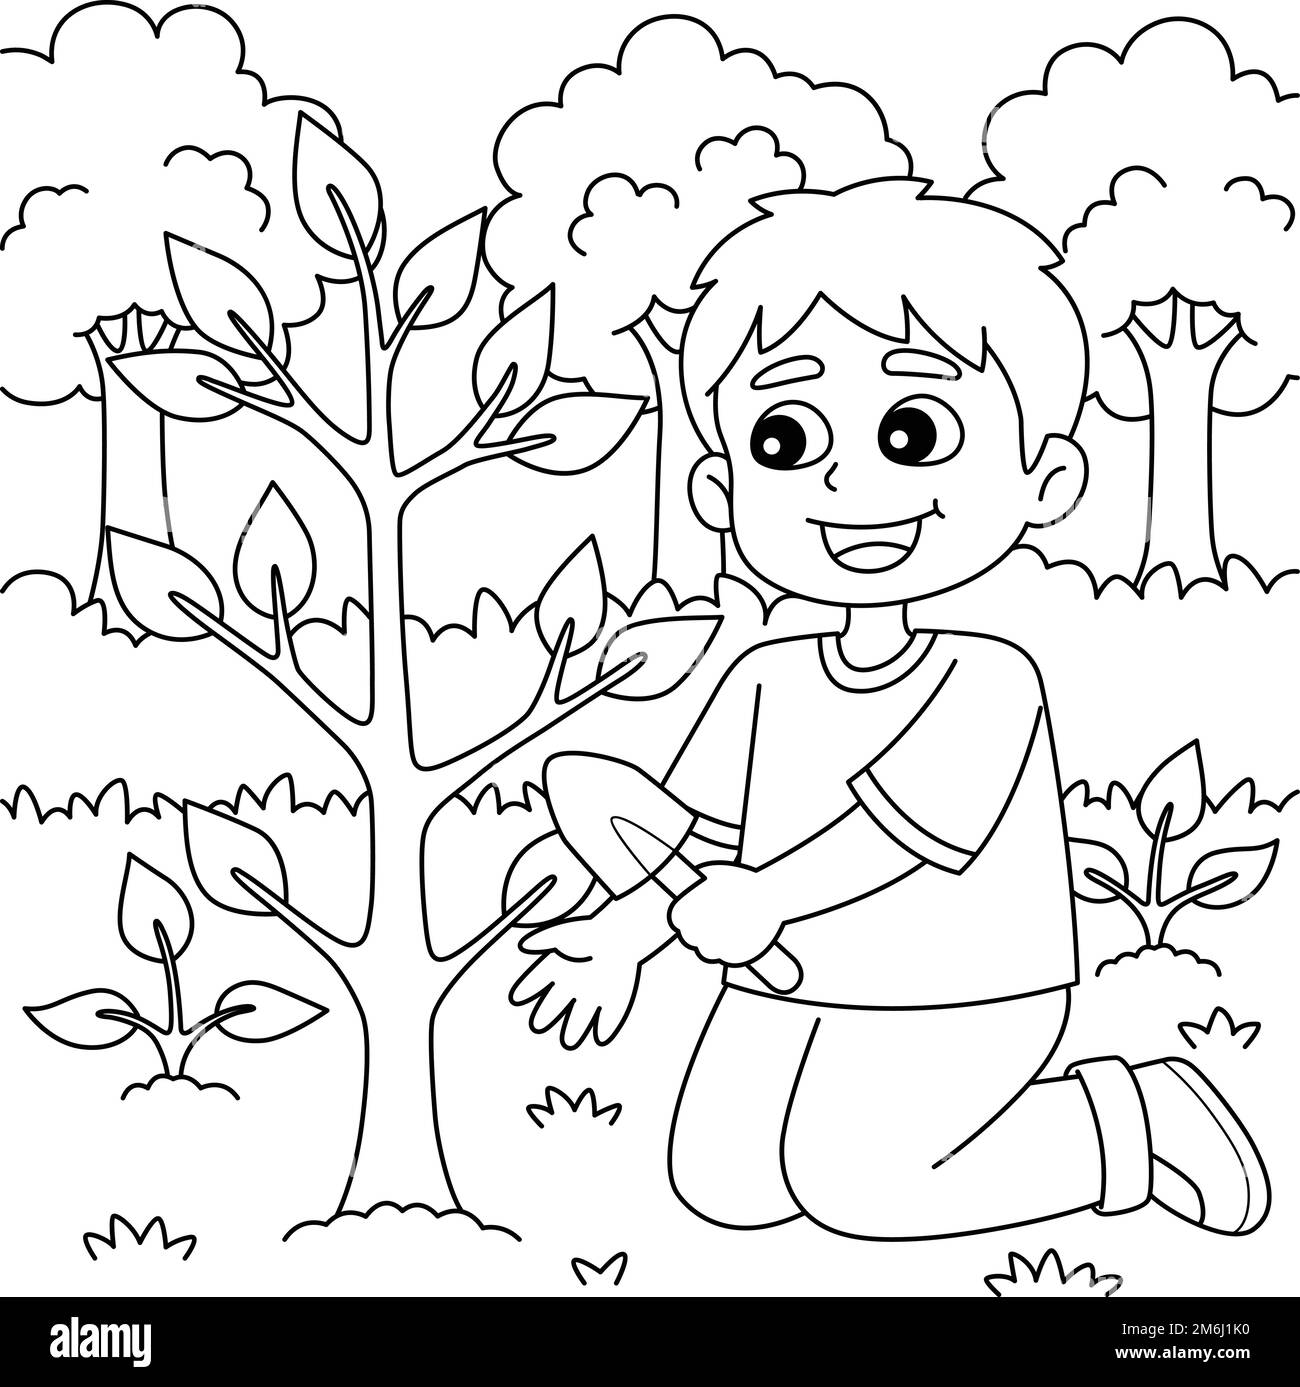 Boy Planting Trees Coloring Page for Kids Stock Vector